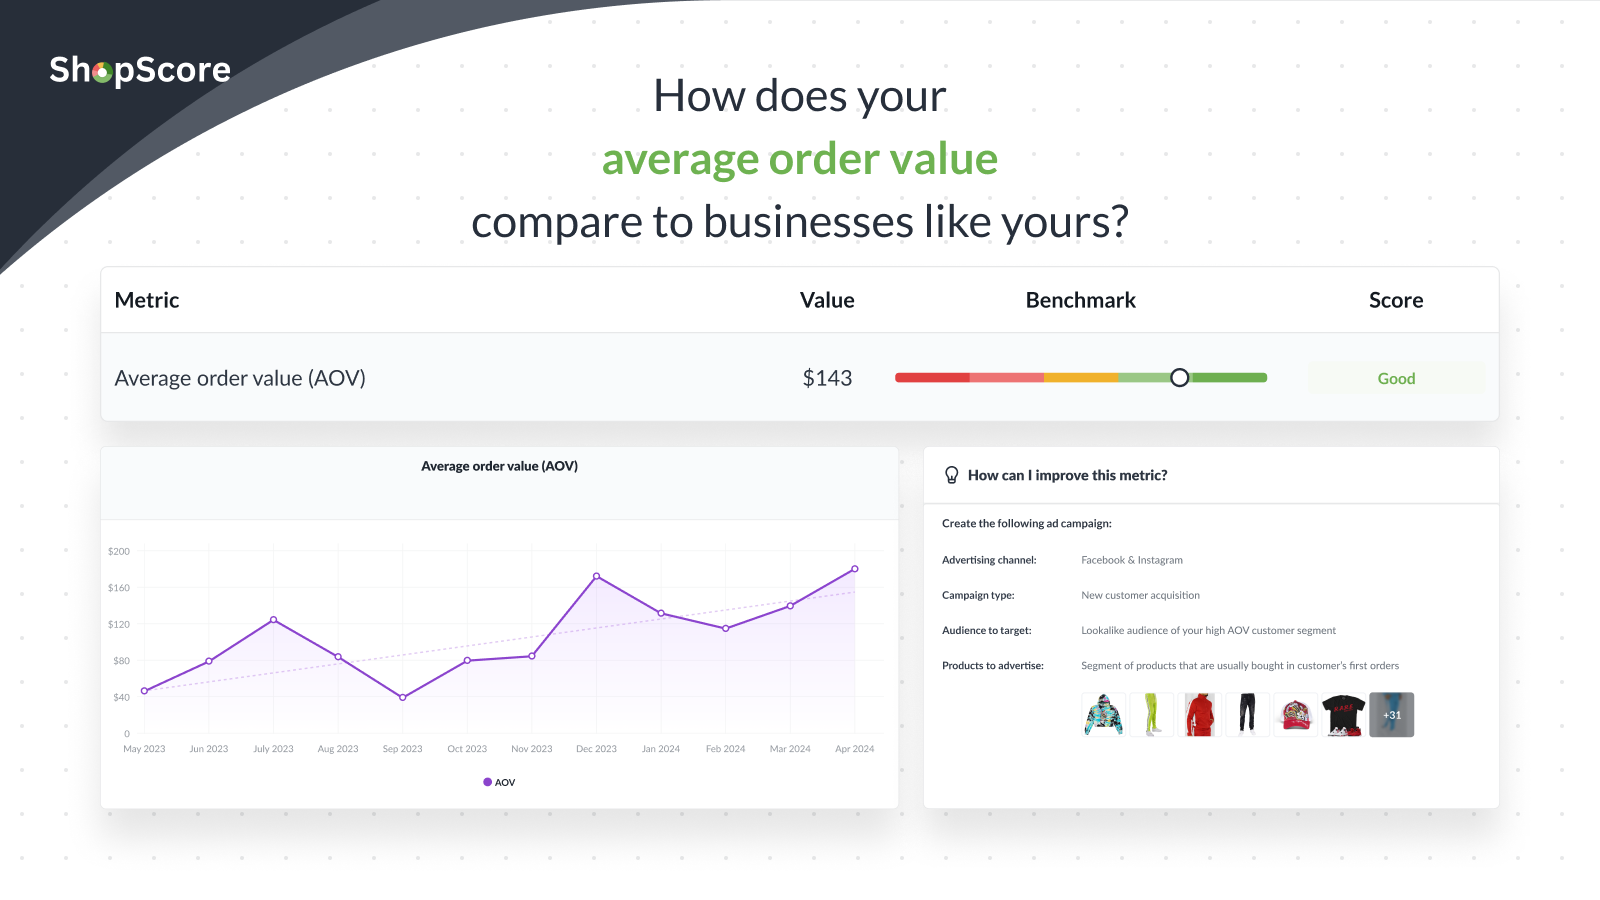 Compare your average order value to your competitors